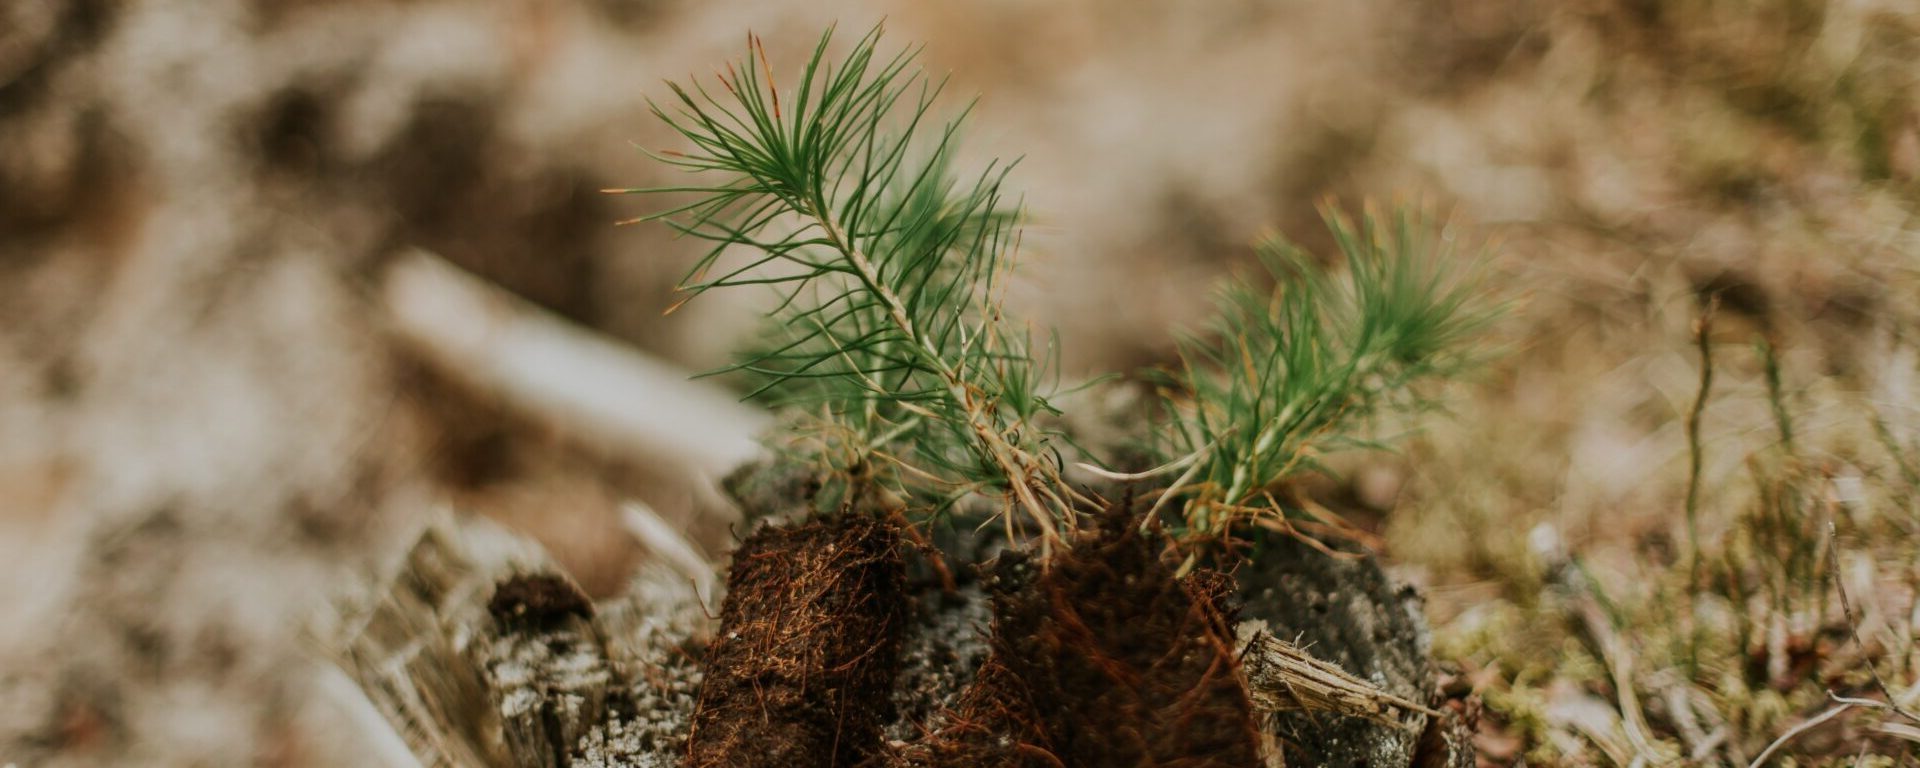 Tiny pine tree growing out of healthy soil